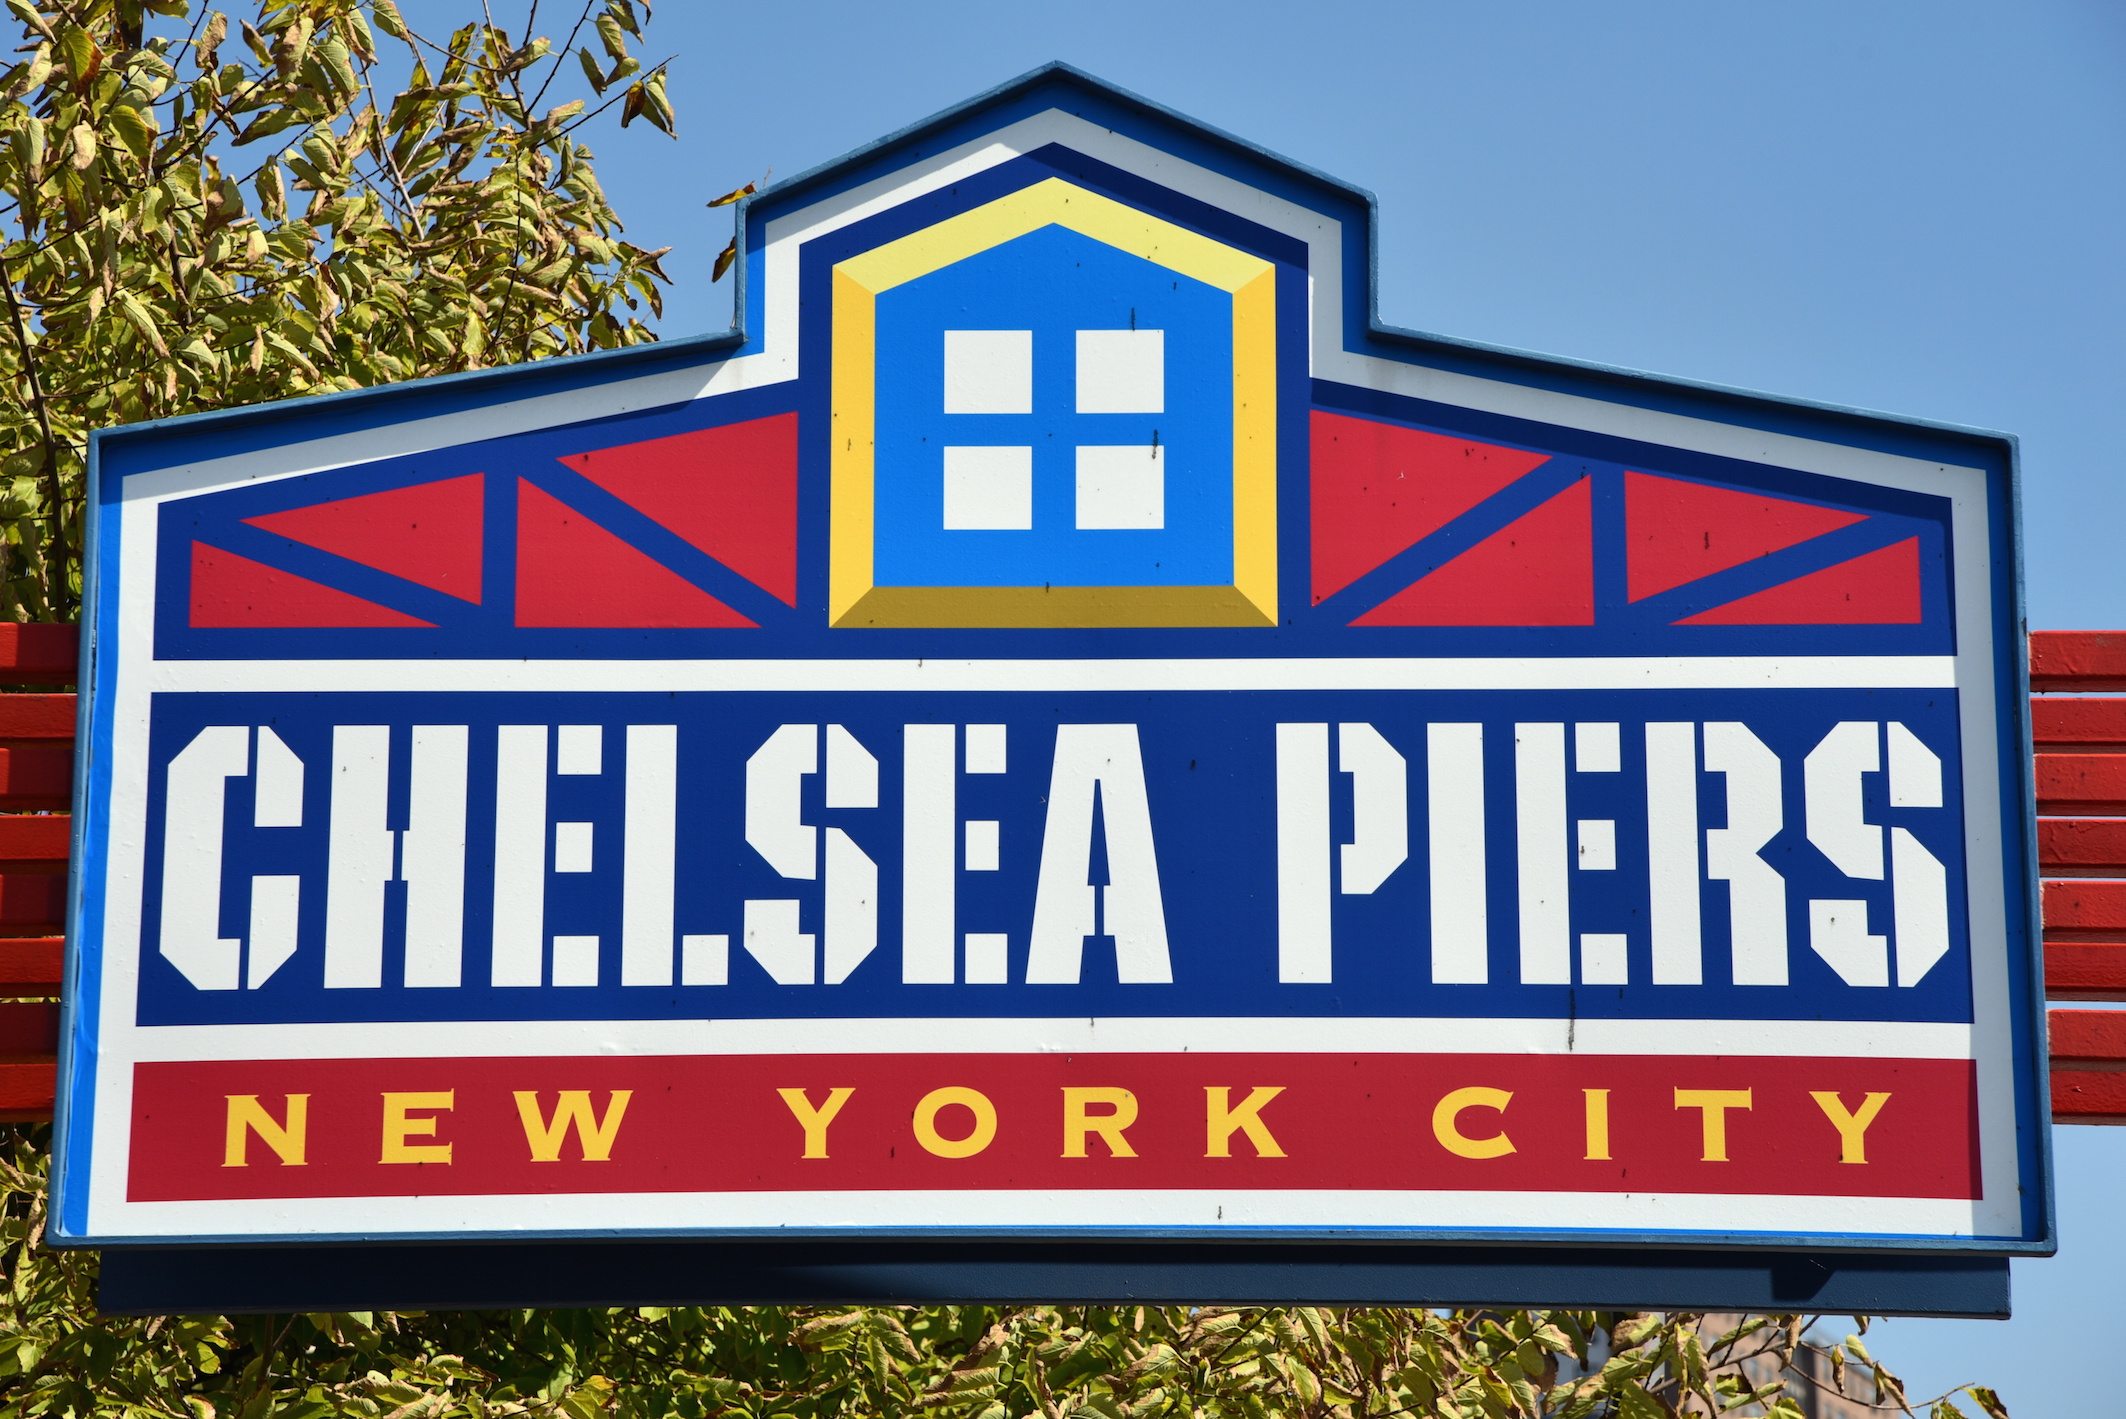 What to do at Chelsea Piers NYC